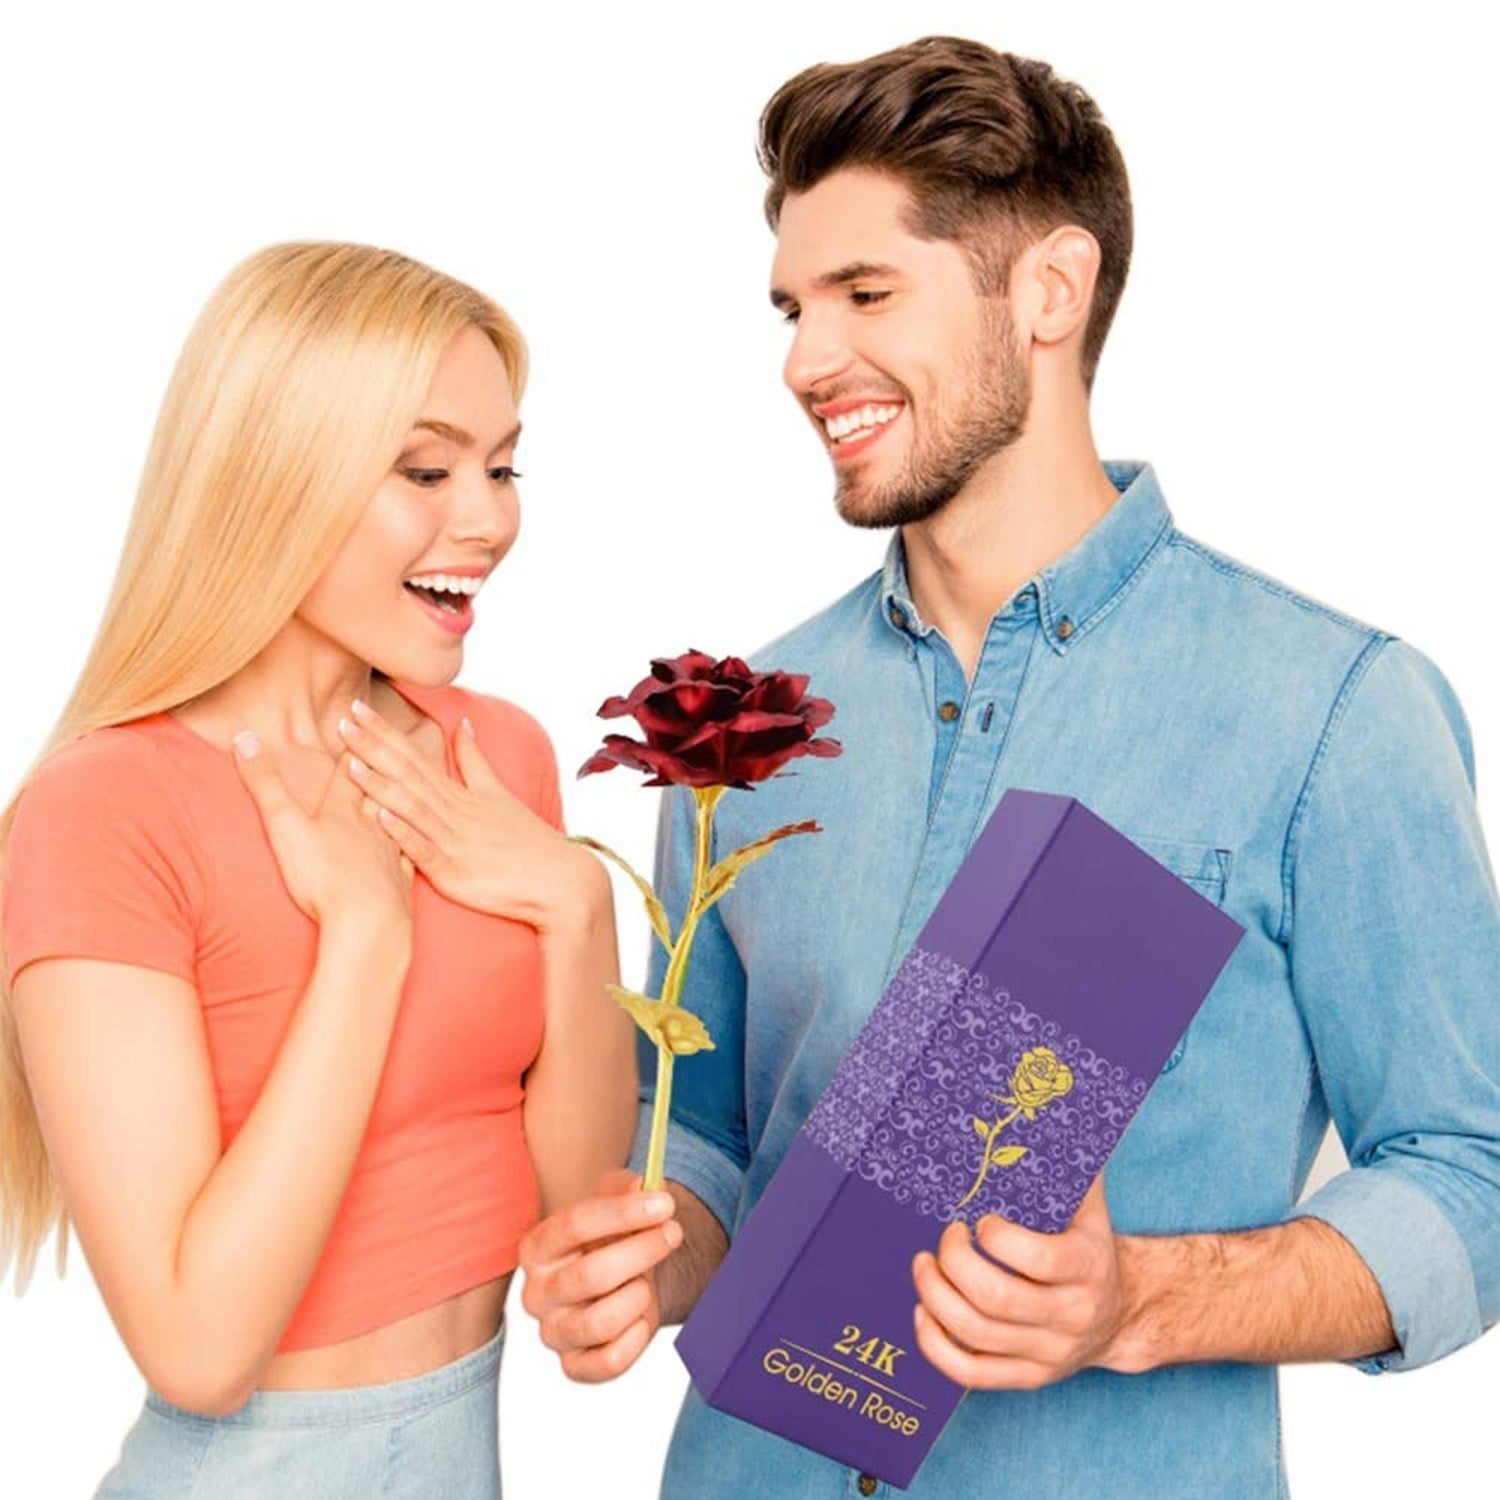 4809 24k Gold Rose,Gold Foil Plated Rose with LOVE Stand and Gift Box for Anniversary,Birthday,Wedding,Thanks giving freeshipping - DeoDap